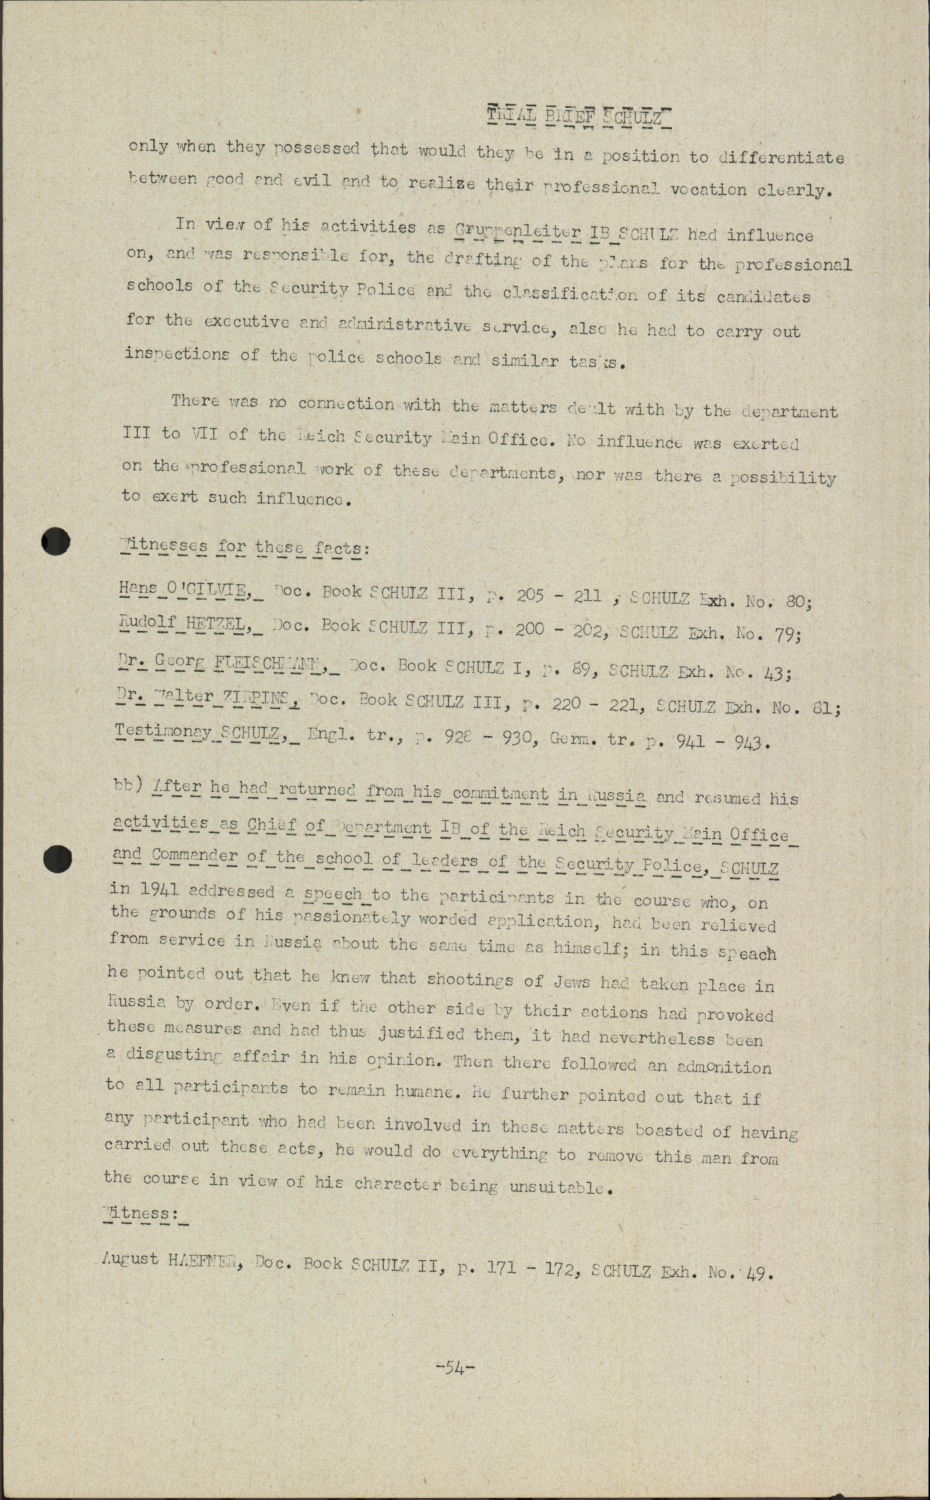 Scanned document page 72